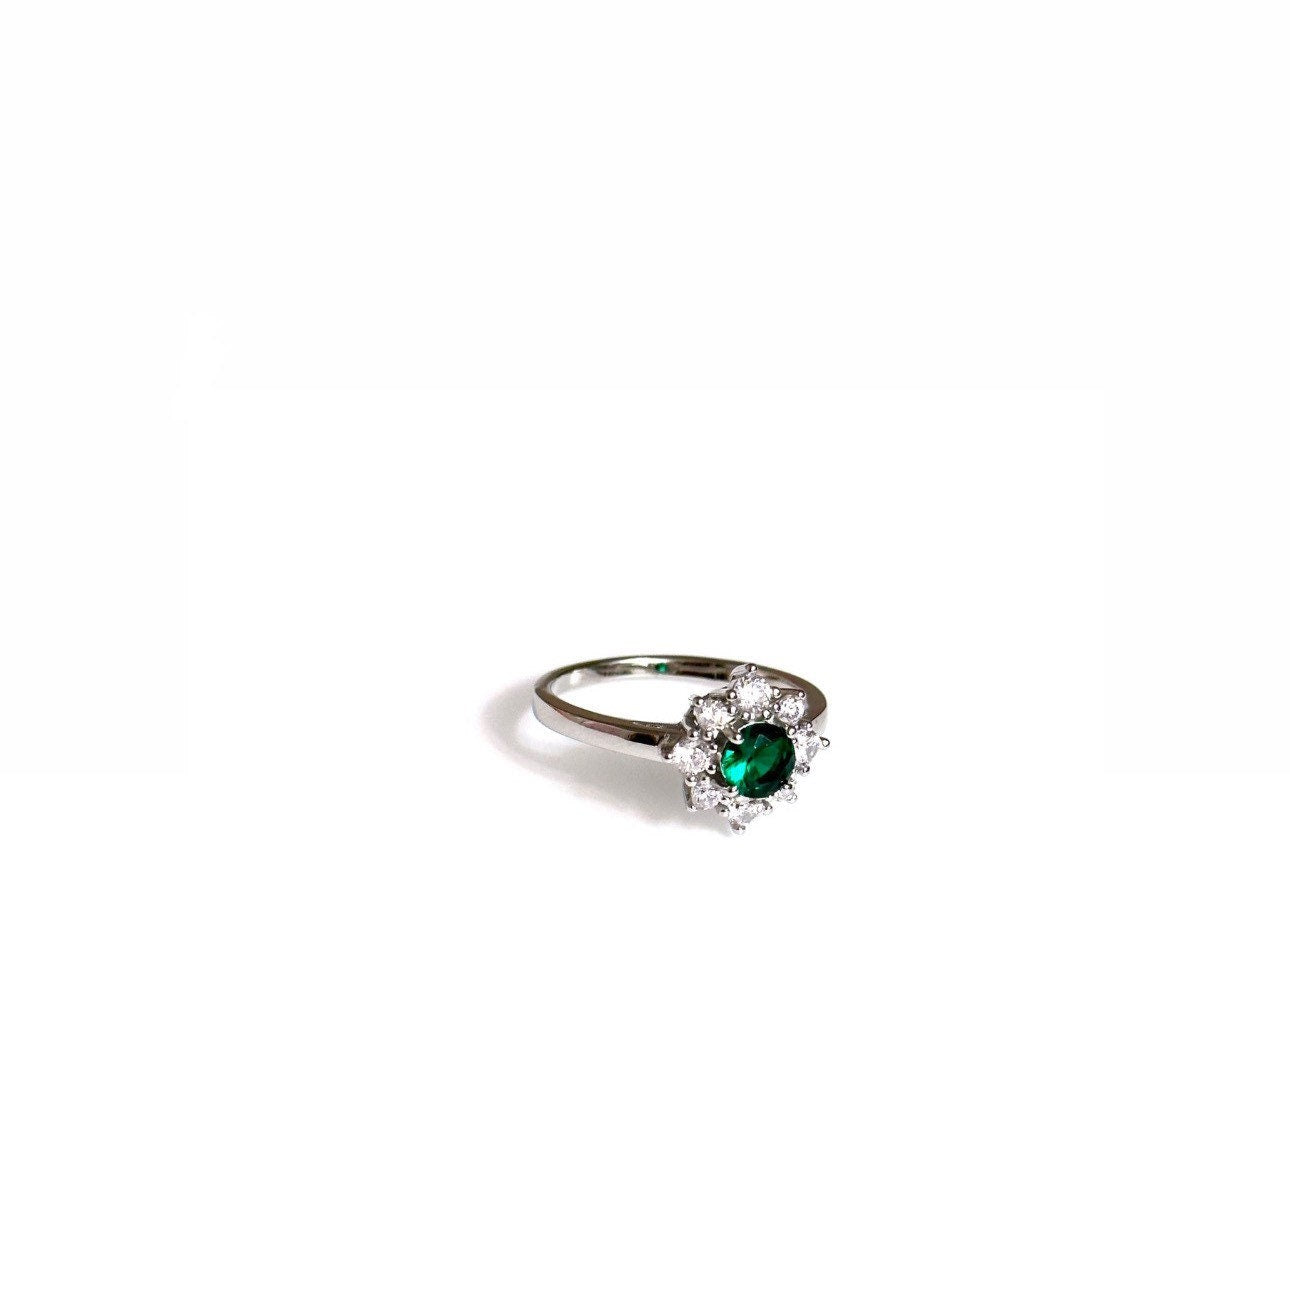 Green flower ring (sterling silver, cubic zirconia)